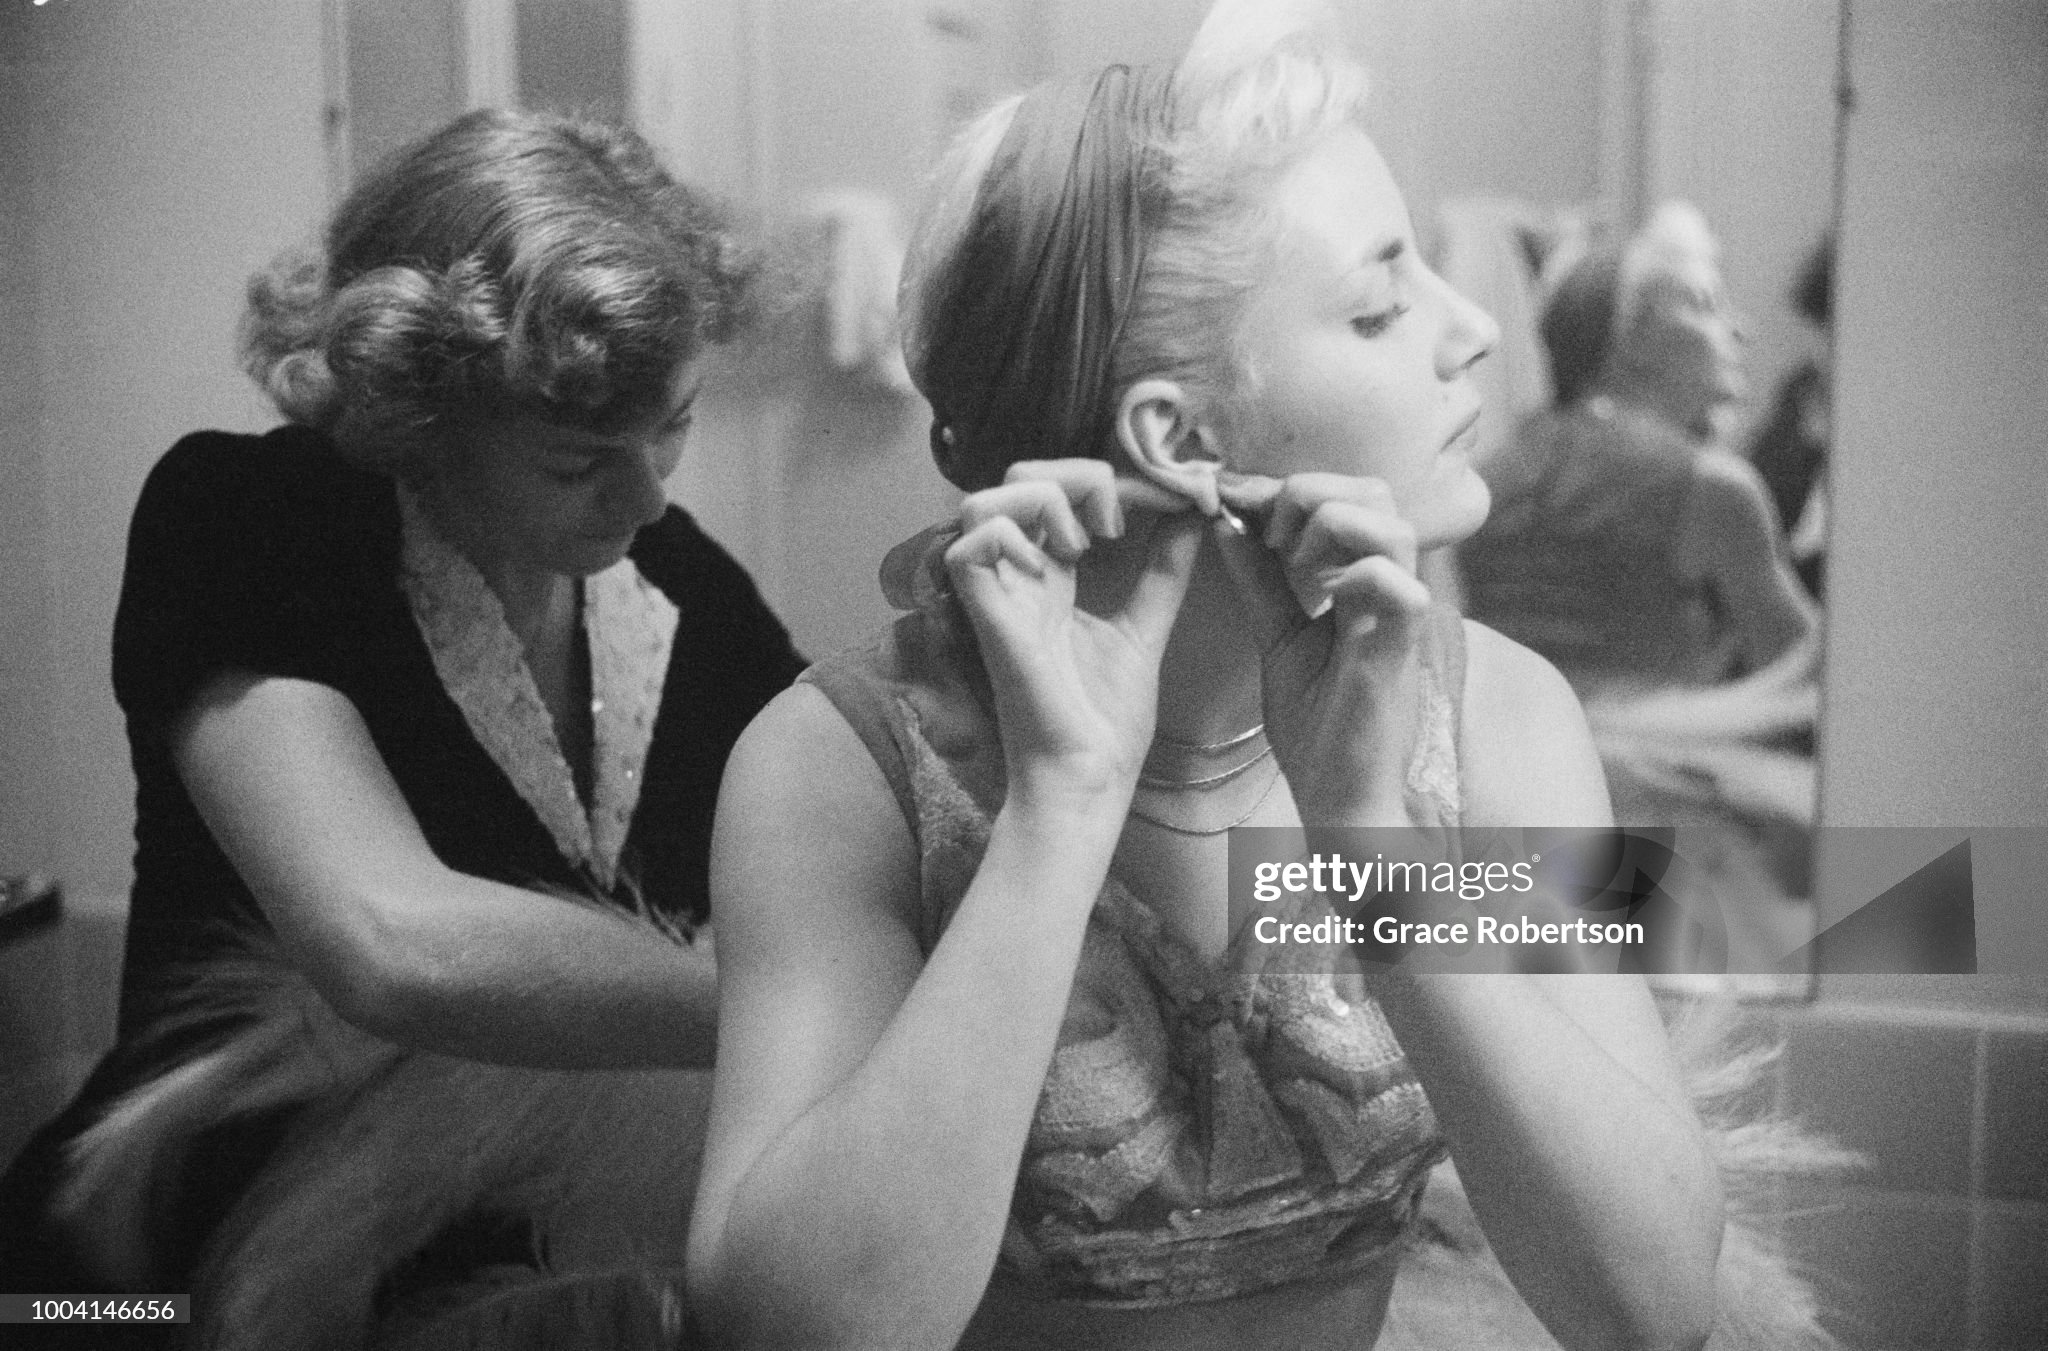 Members of a newly-formed Bluebell Girls dance troupe from England, in their dressing room during rehearsals at the Nuevo Teatro in Milan in November 1951. 